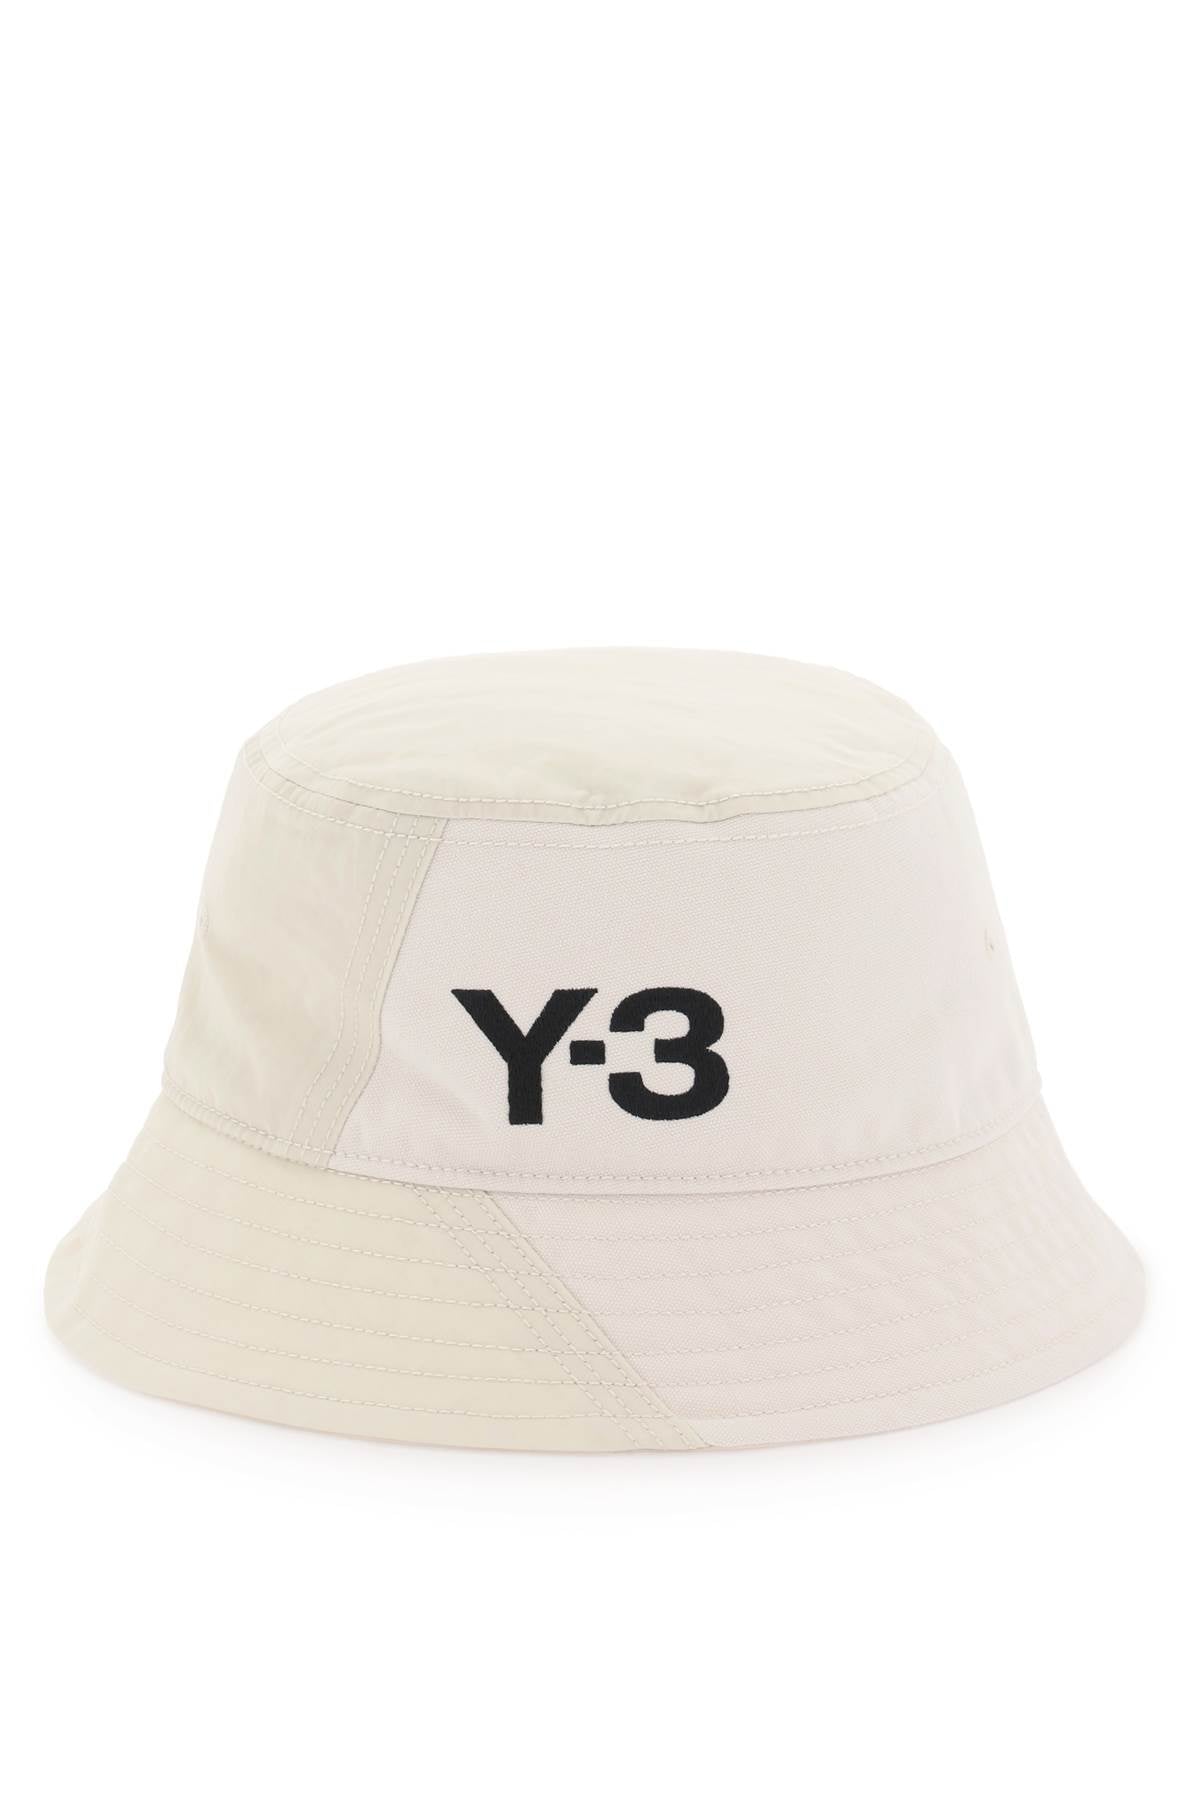 Y-3 bucket hat with embroidered logo